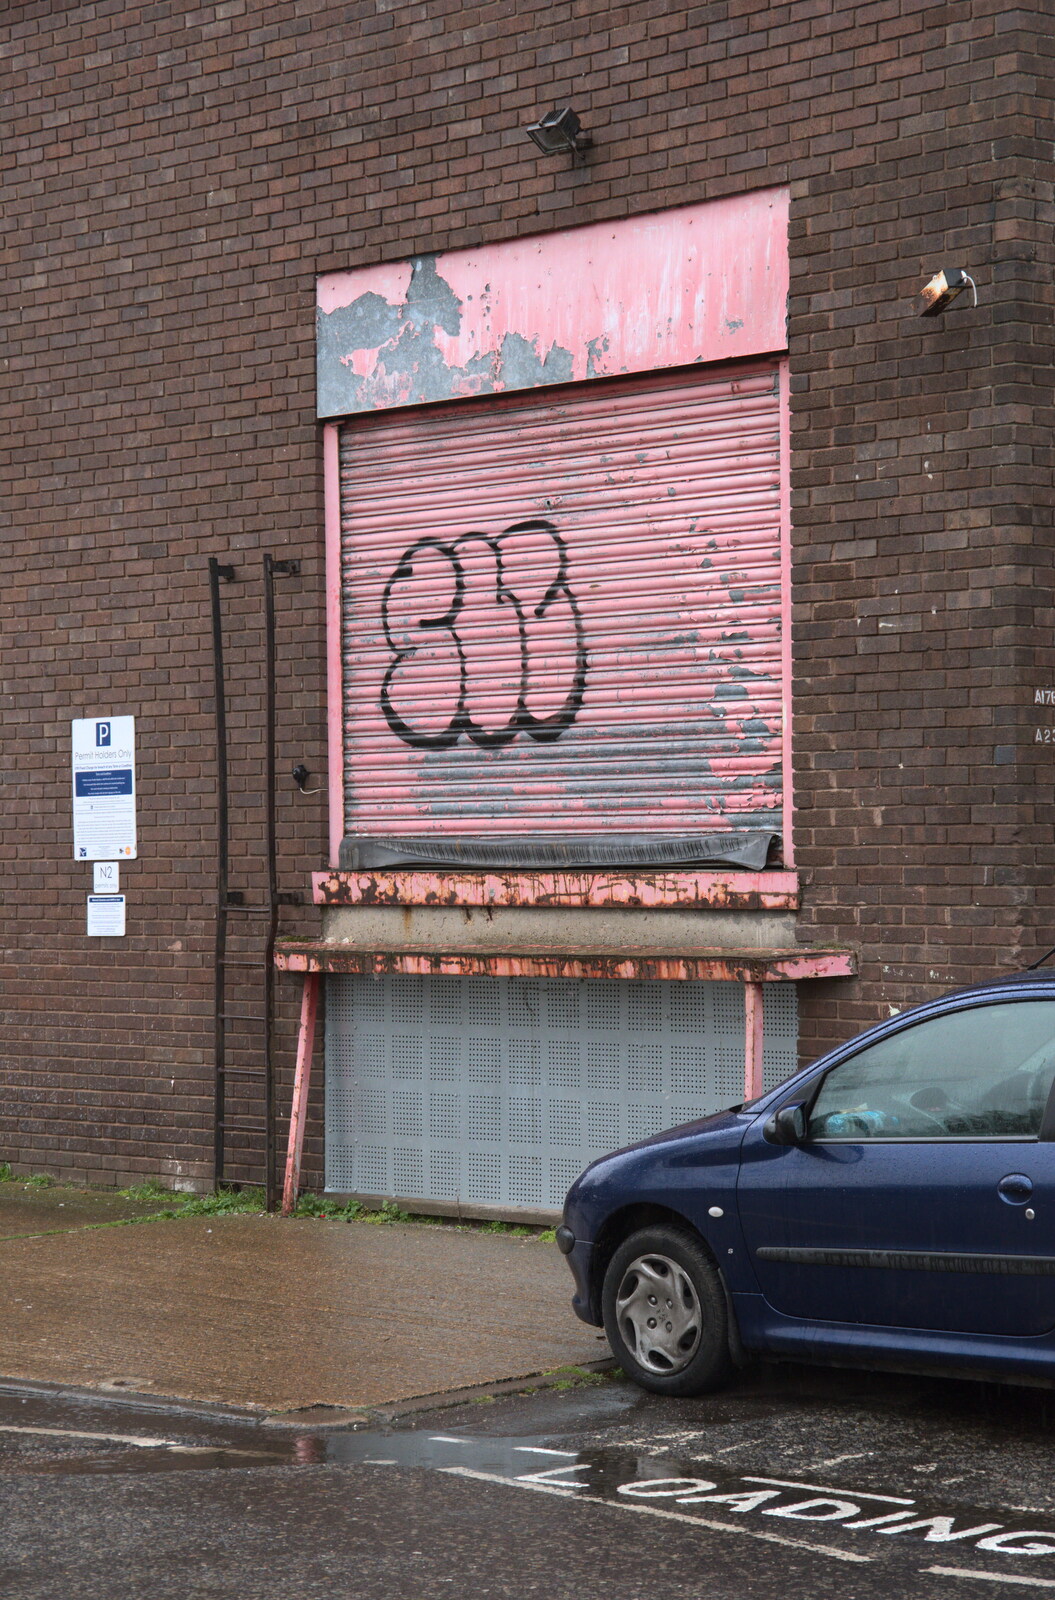 A faded pink shutter from Fred's Flute Exam, Ipswich, Suffolk - 5th March 2020